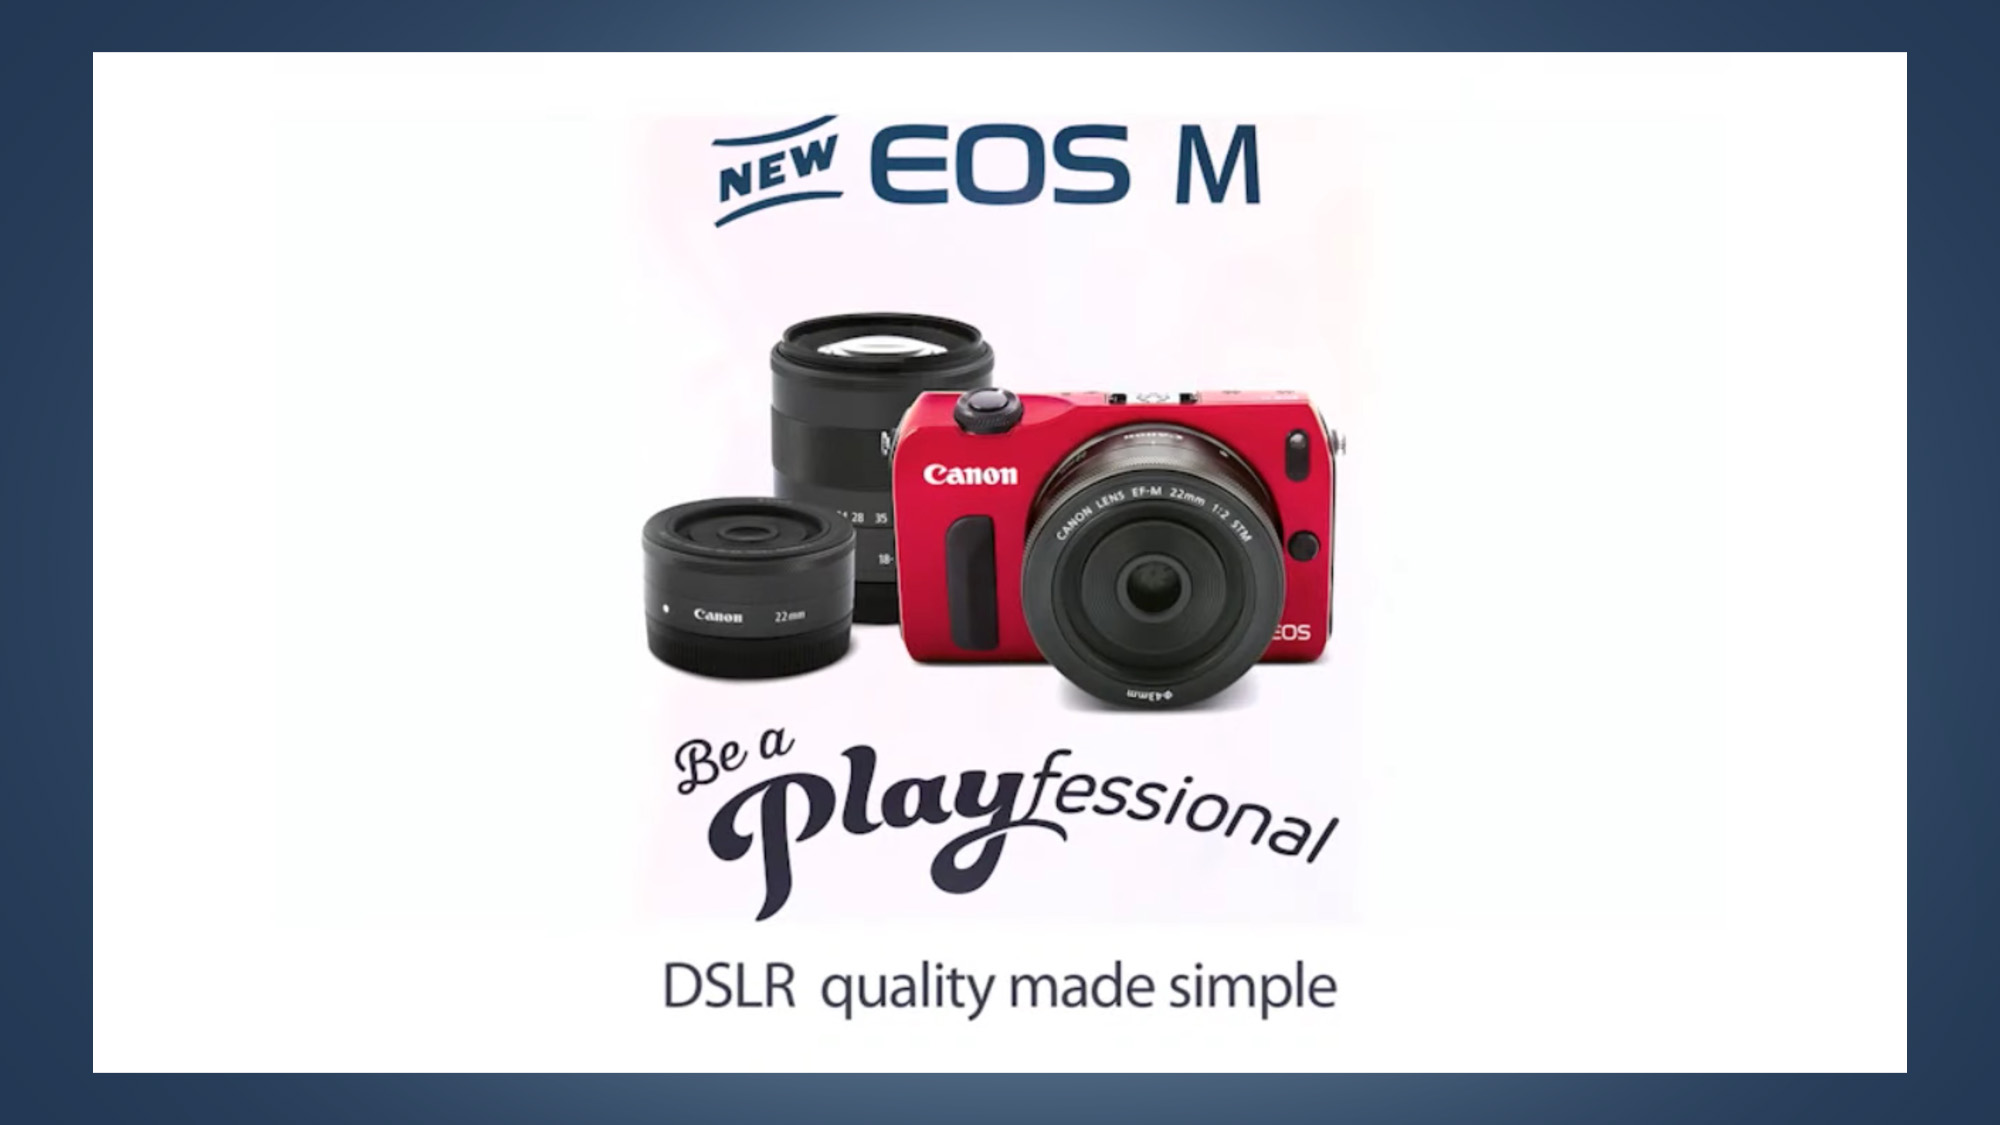 An advert for the Canon EOS M camera